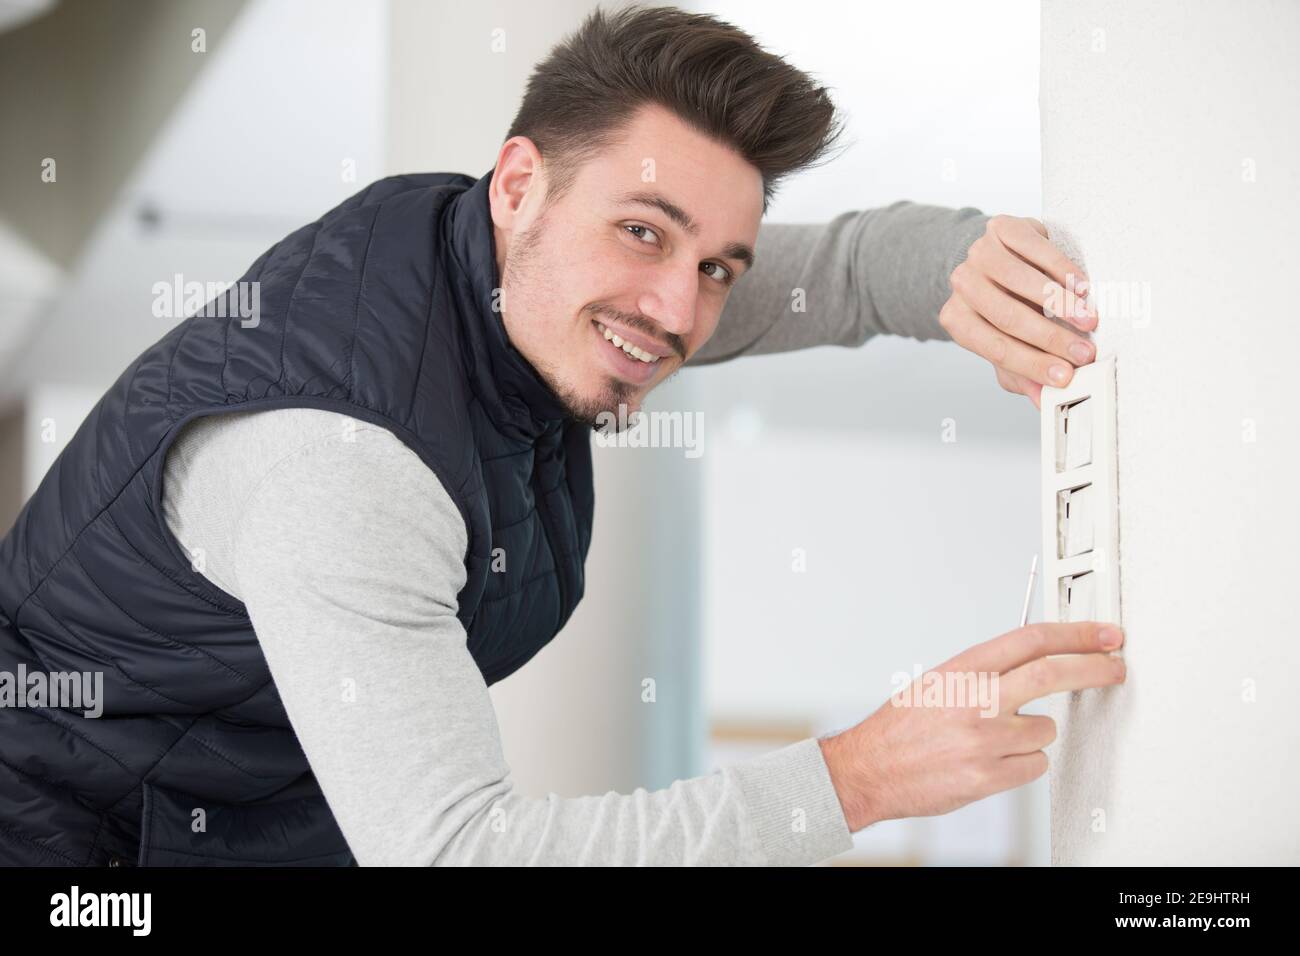 electrician man installing switch Stock Photo